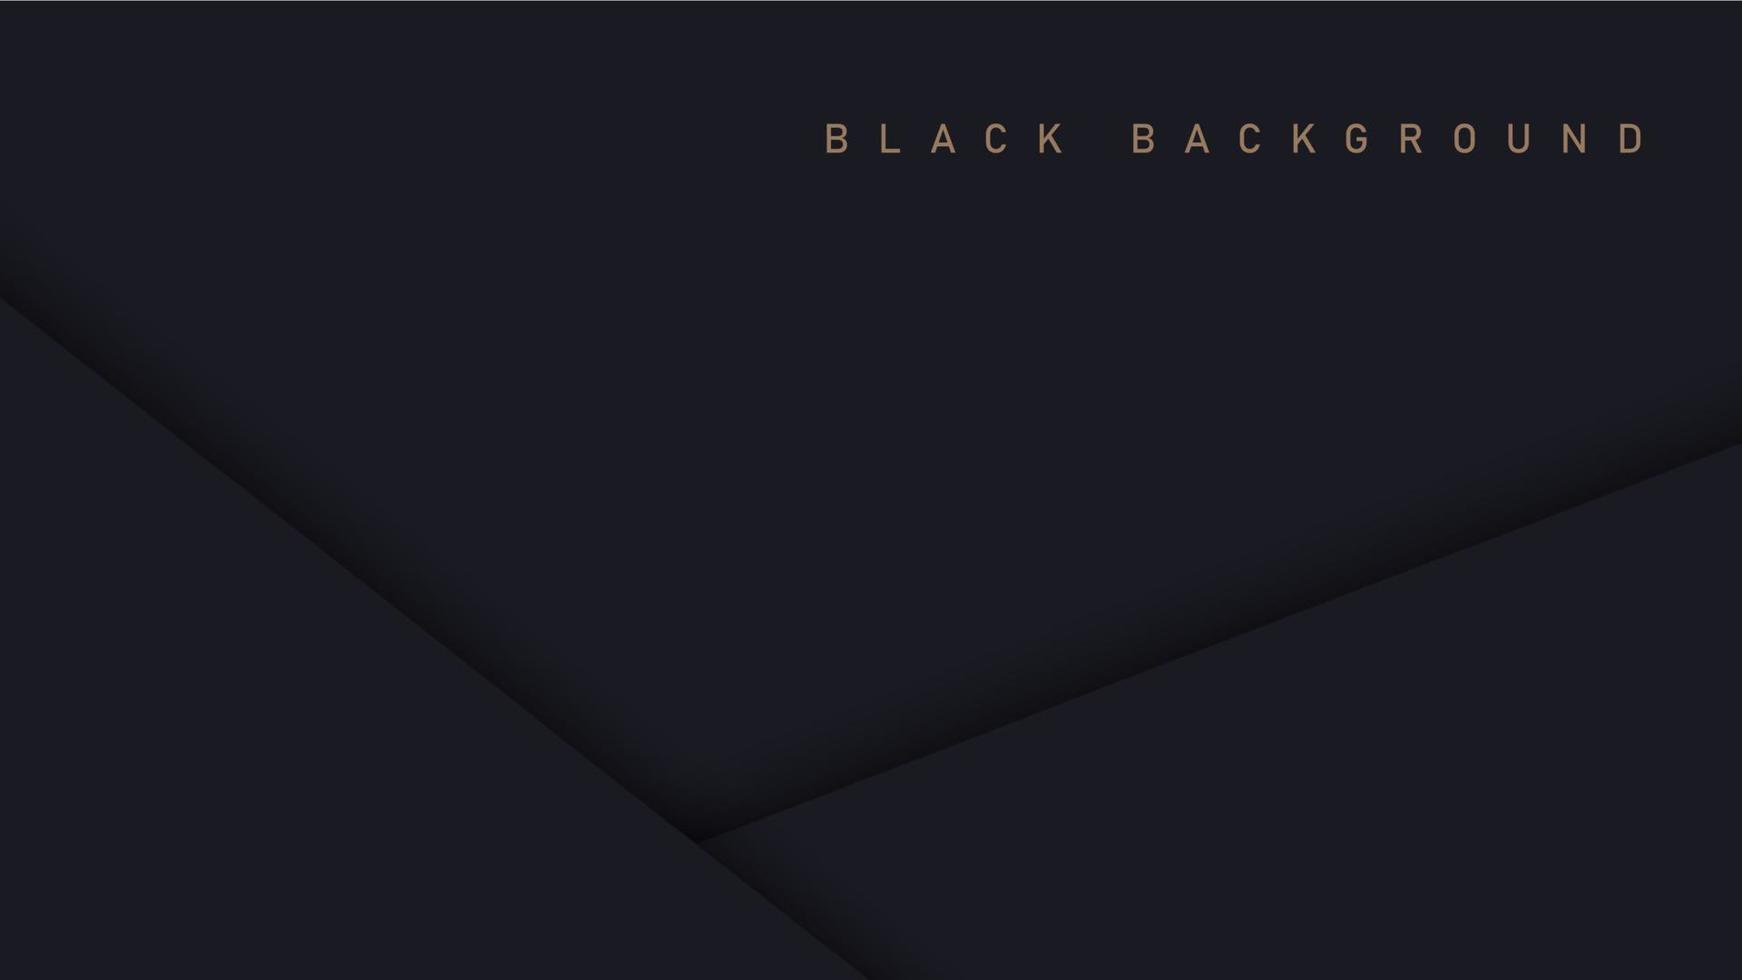 Black luxury background with shadow elements, paper concept template for your design vector